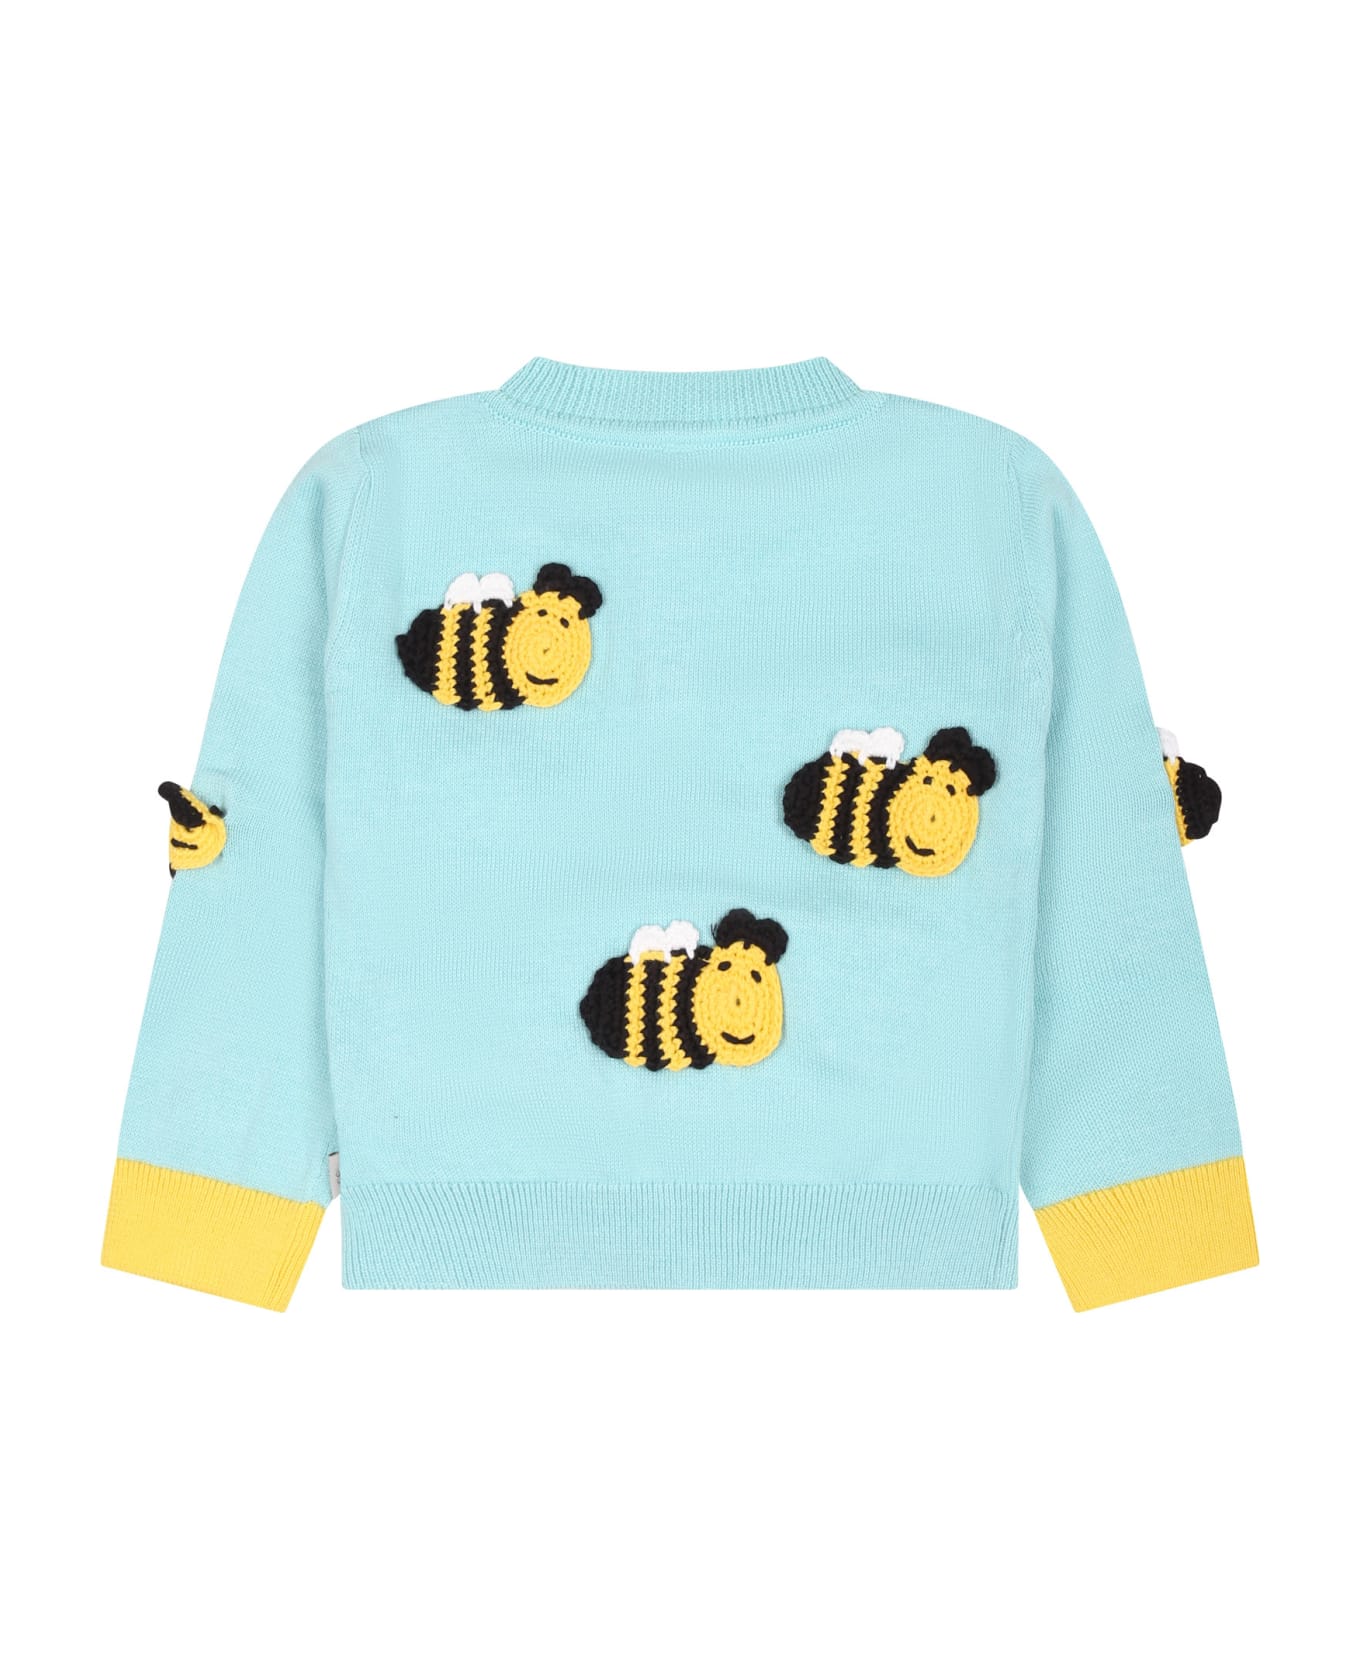 Stella McCartney Kids Light Blue Cardigan For Baby Girl With Bees - Light blue